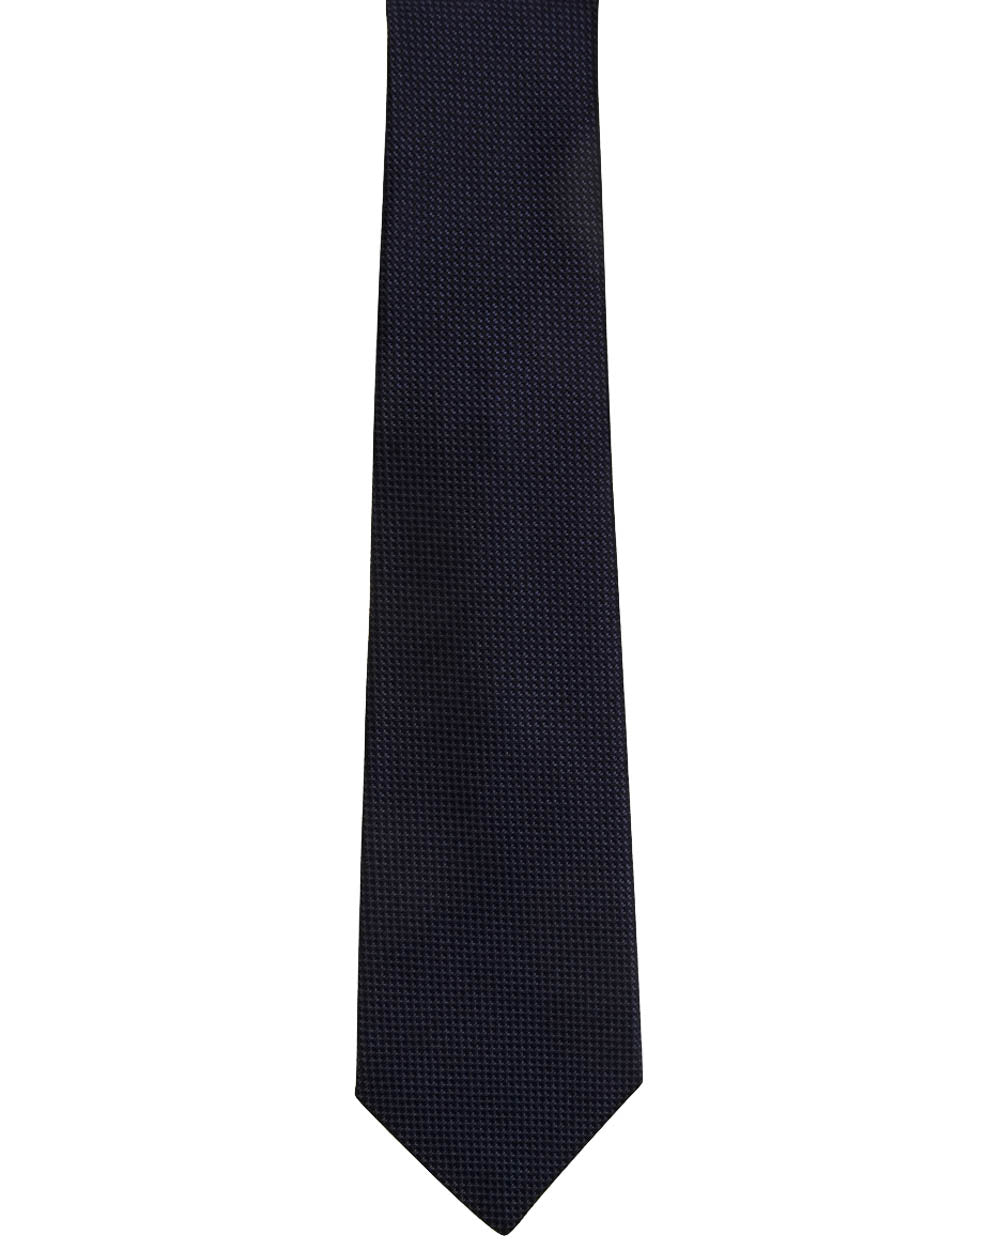 Navy and Black Textured Woven Tie